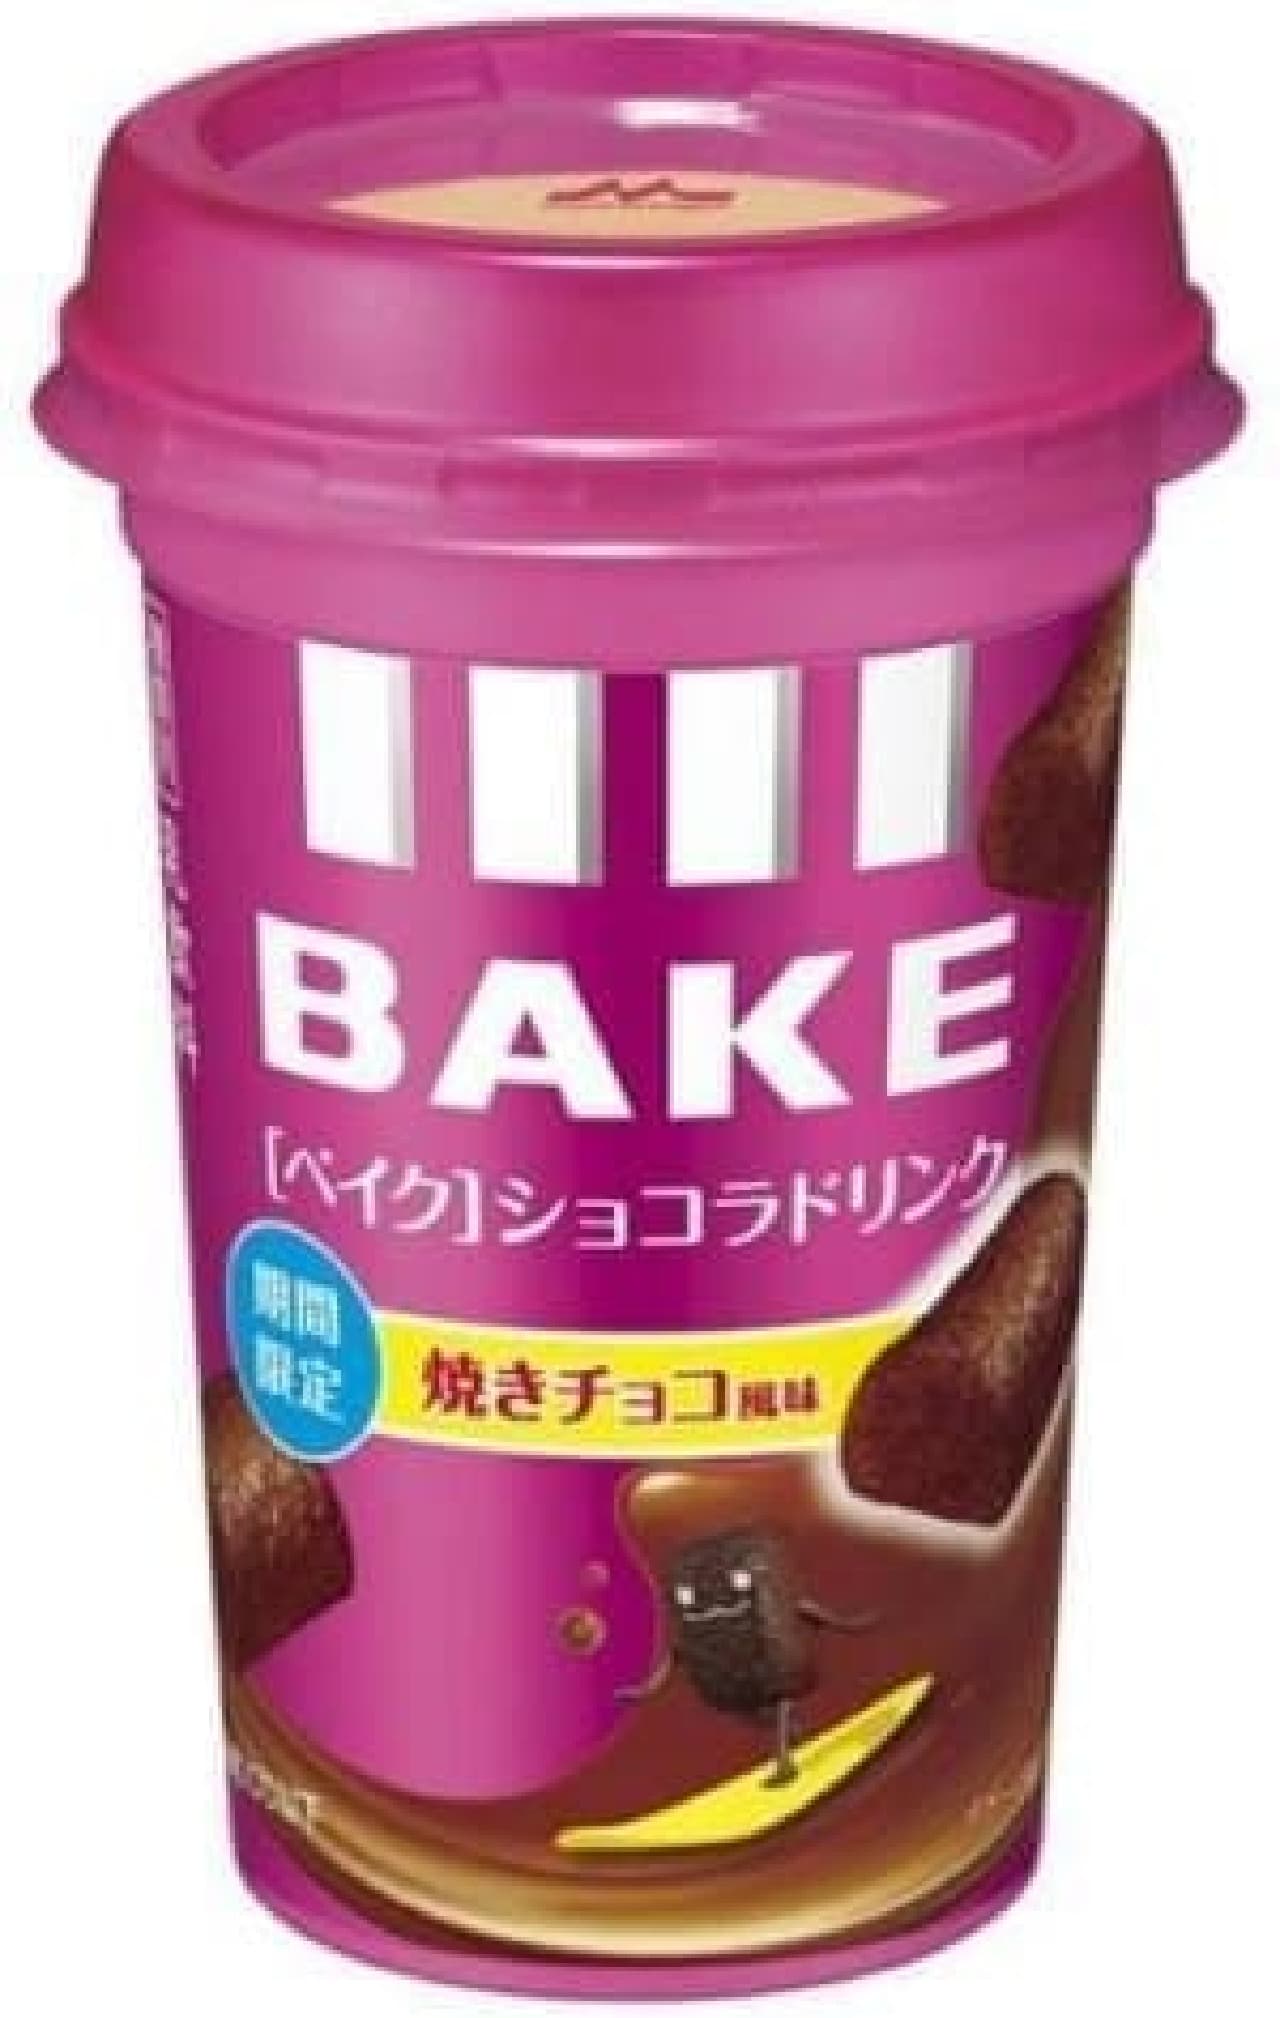 The fragrant and rich baked chocolate "Bake" is a drink